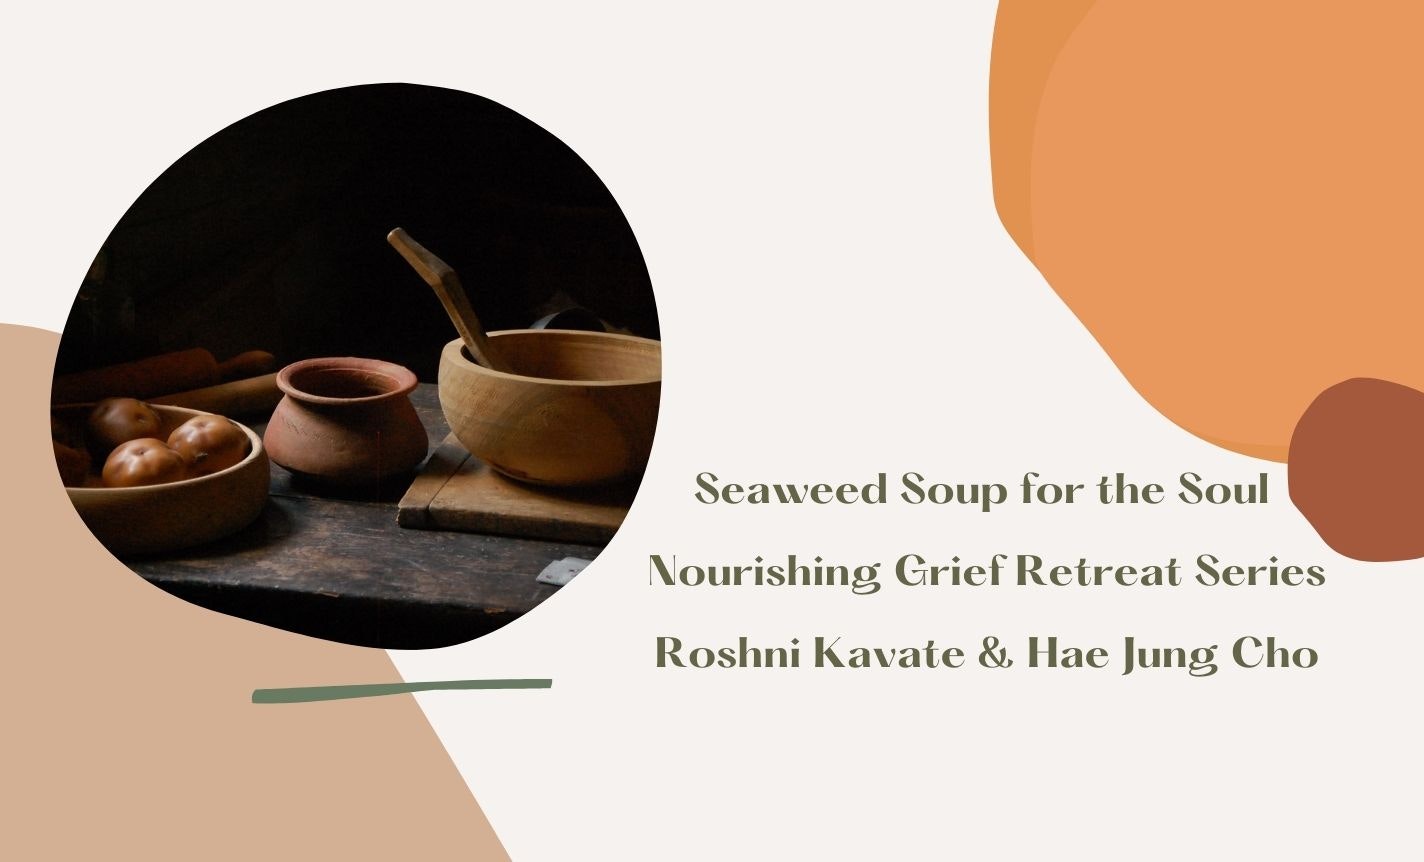 Seaweed Soup for the Soul: Recipes for Tending to your Heart